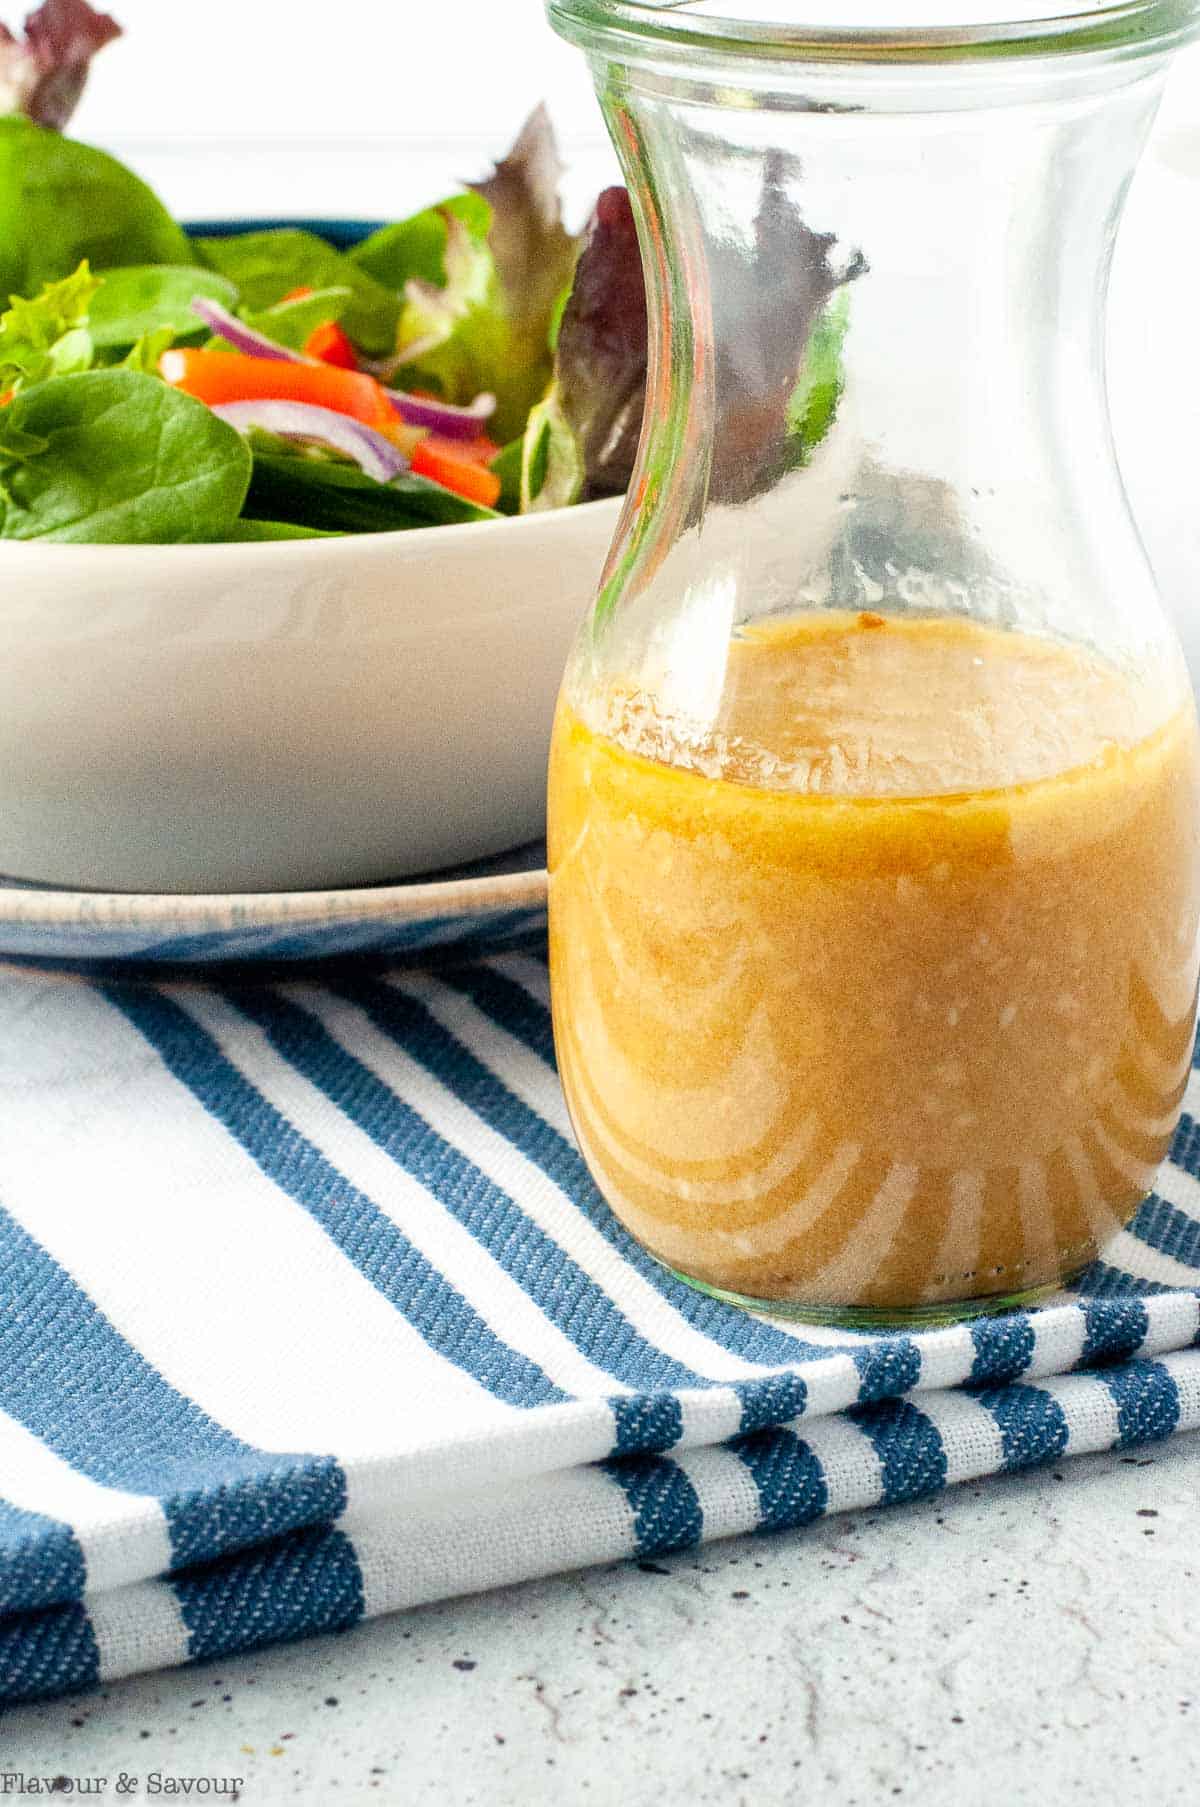 close up view of a jar of miso dressing with sesame seeds